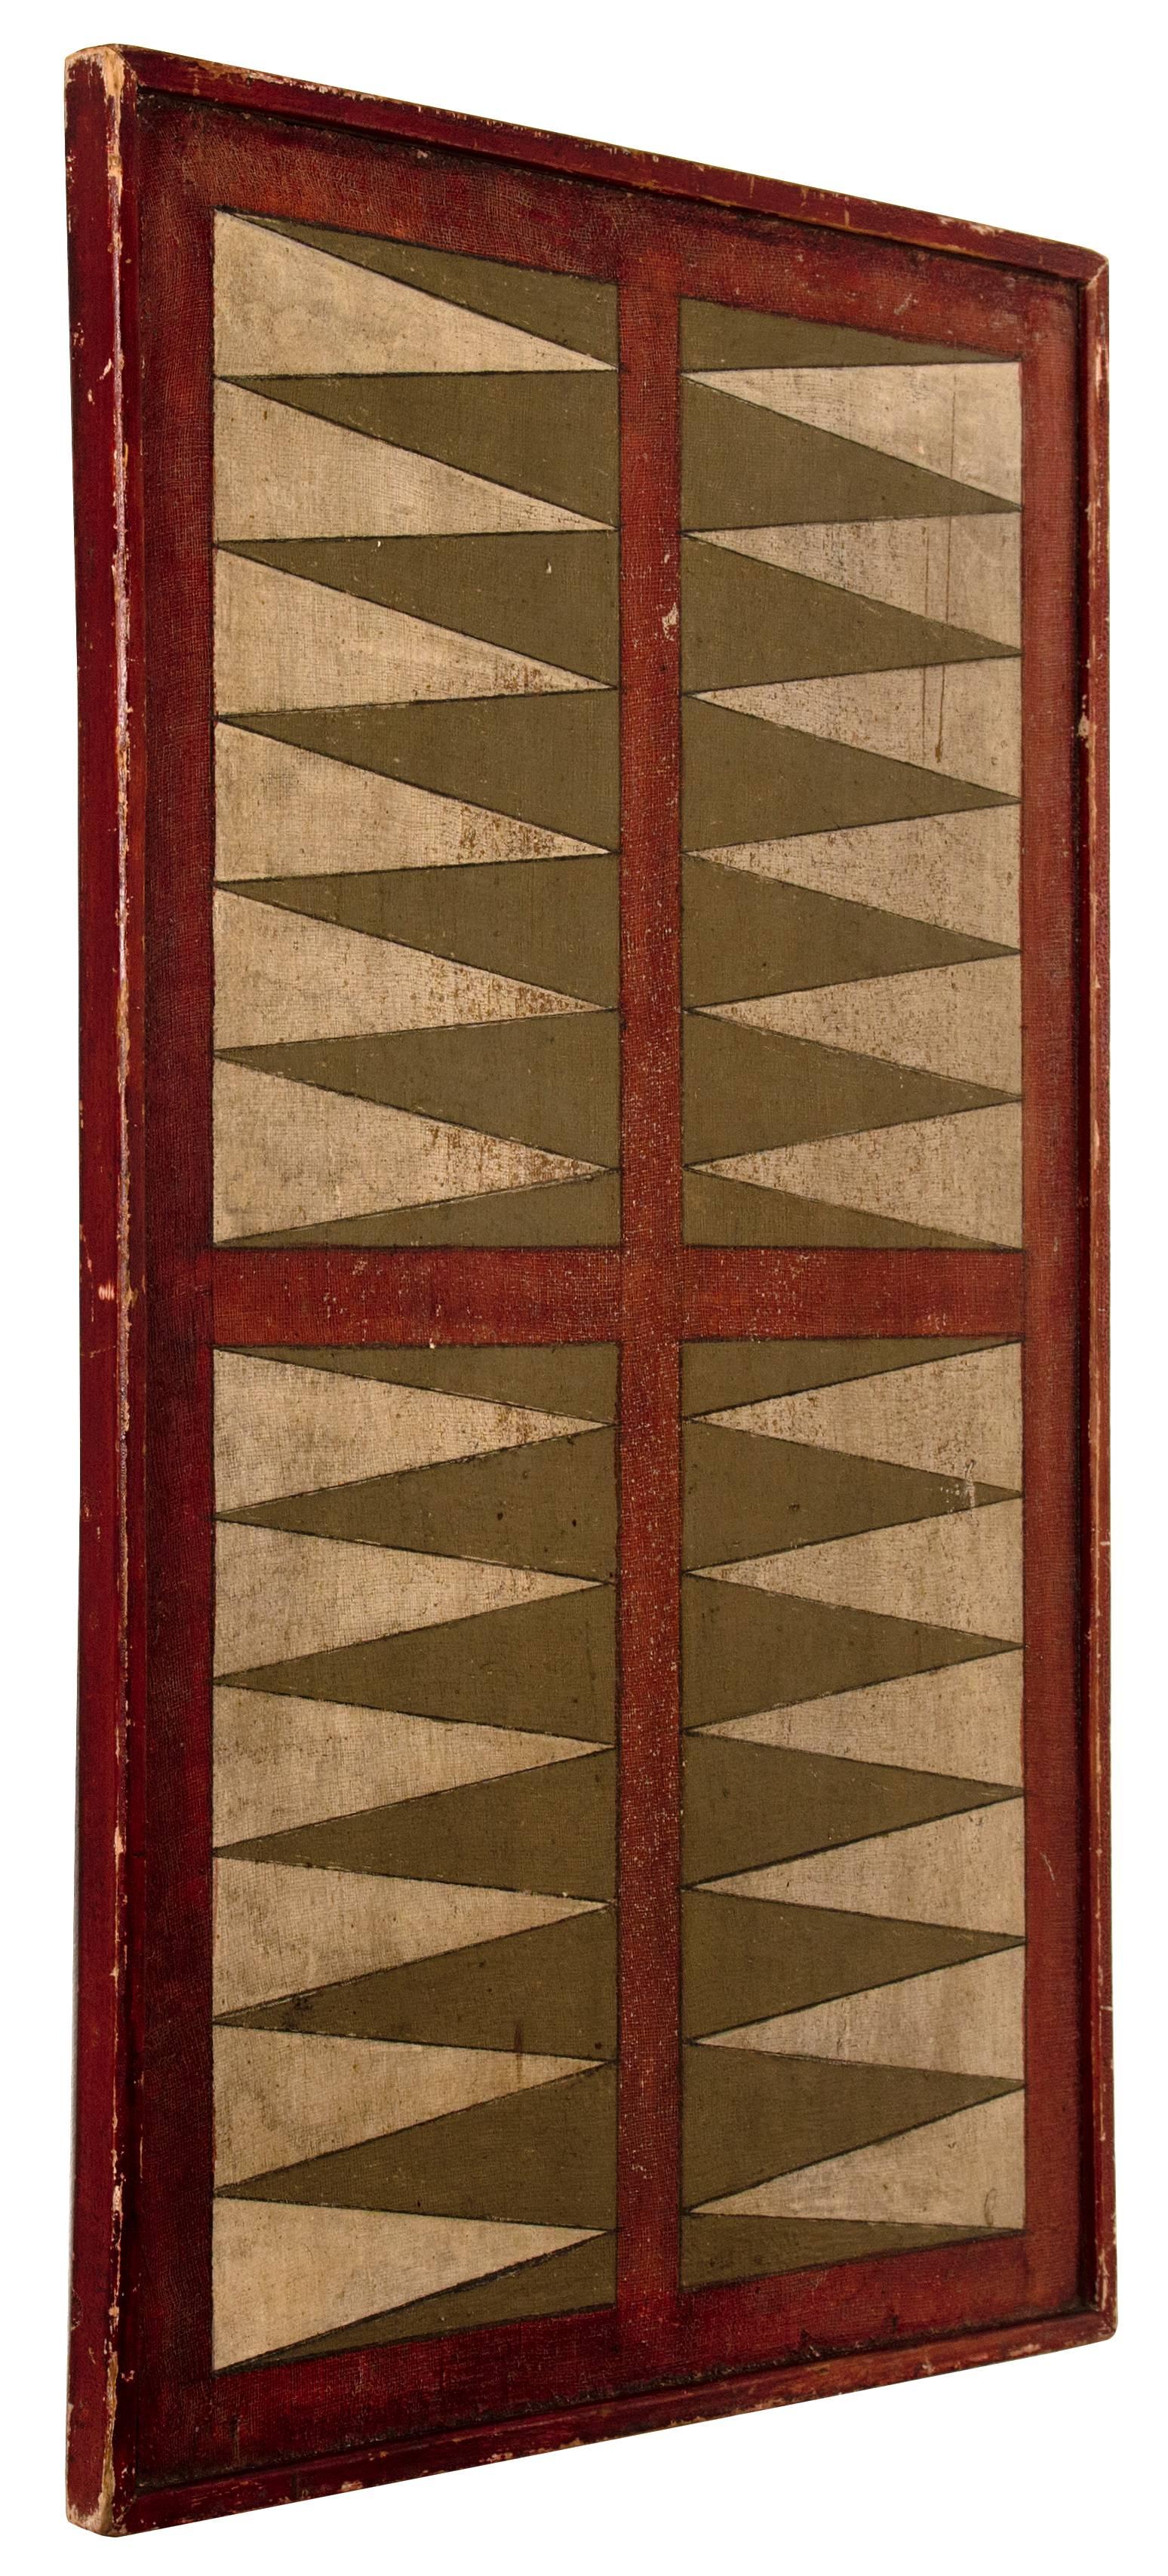 Backgammon game board with checkers on the reverse. Minimalist rendering of a game board. Original paint on canvas covered panel, American, circa 1900.
Geometric abstract.